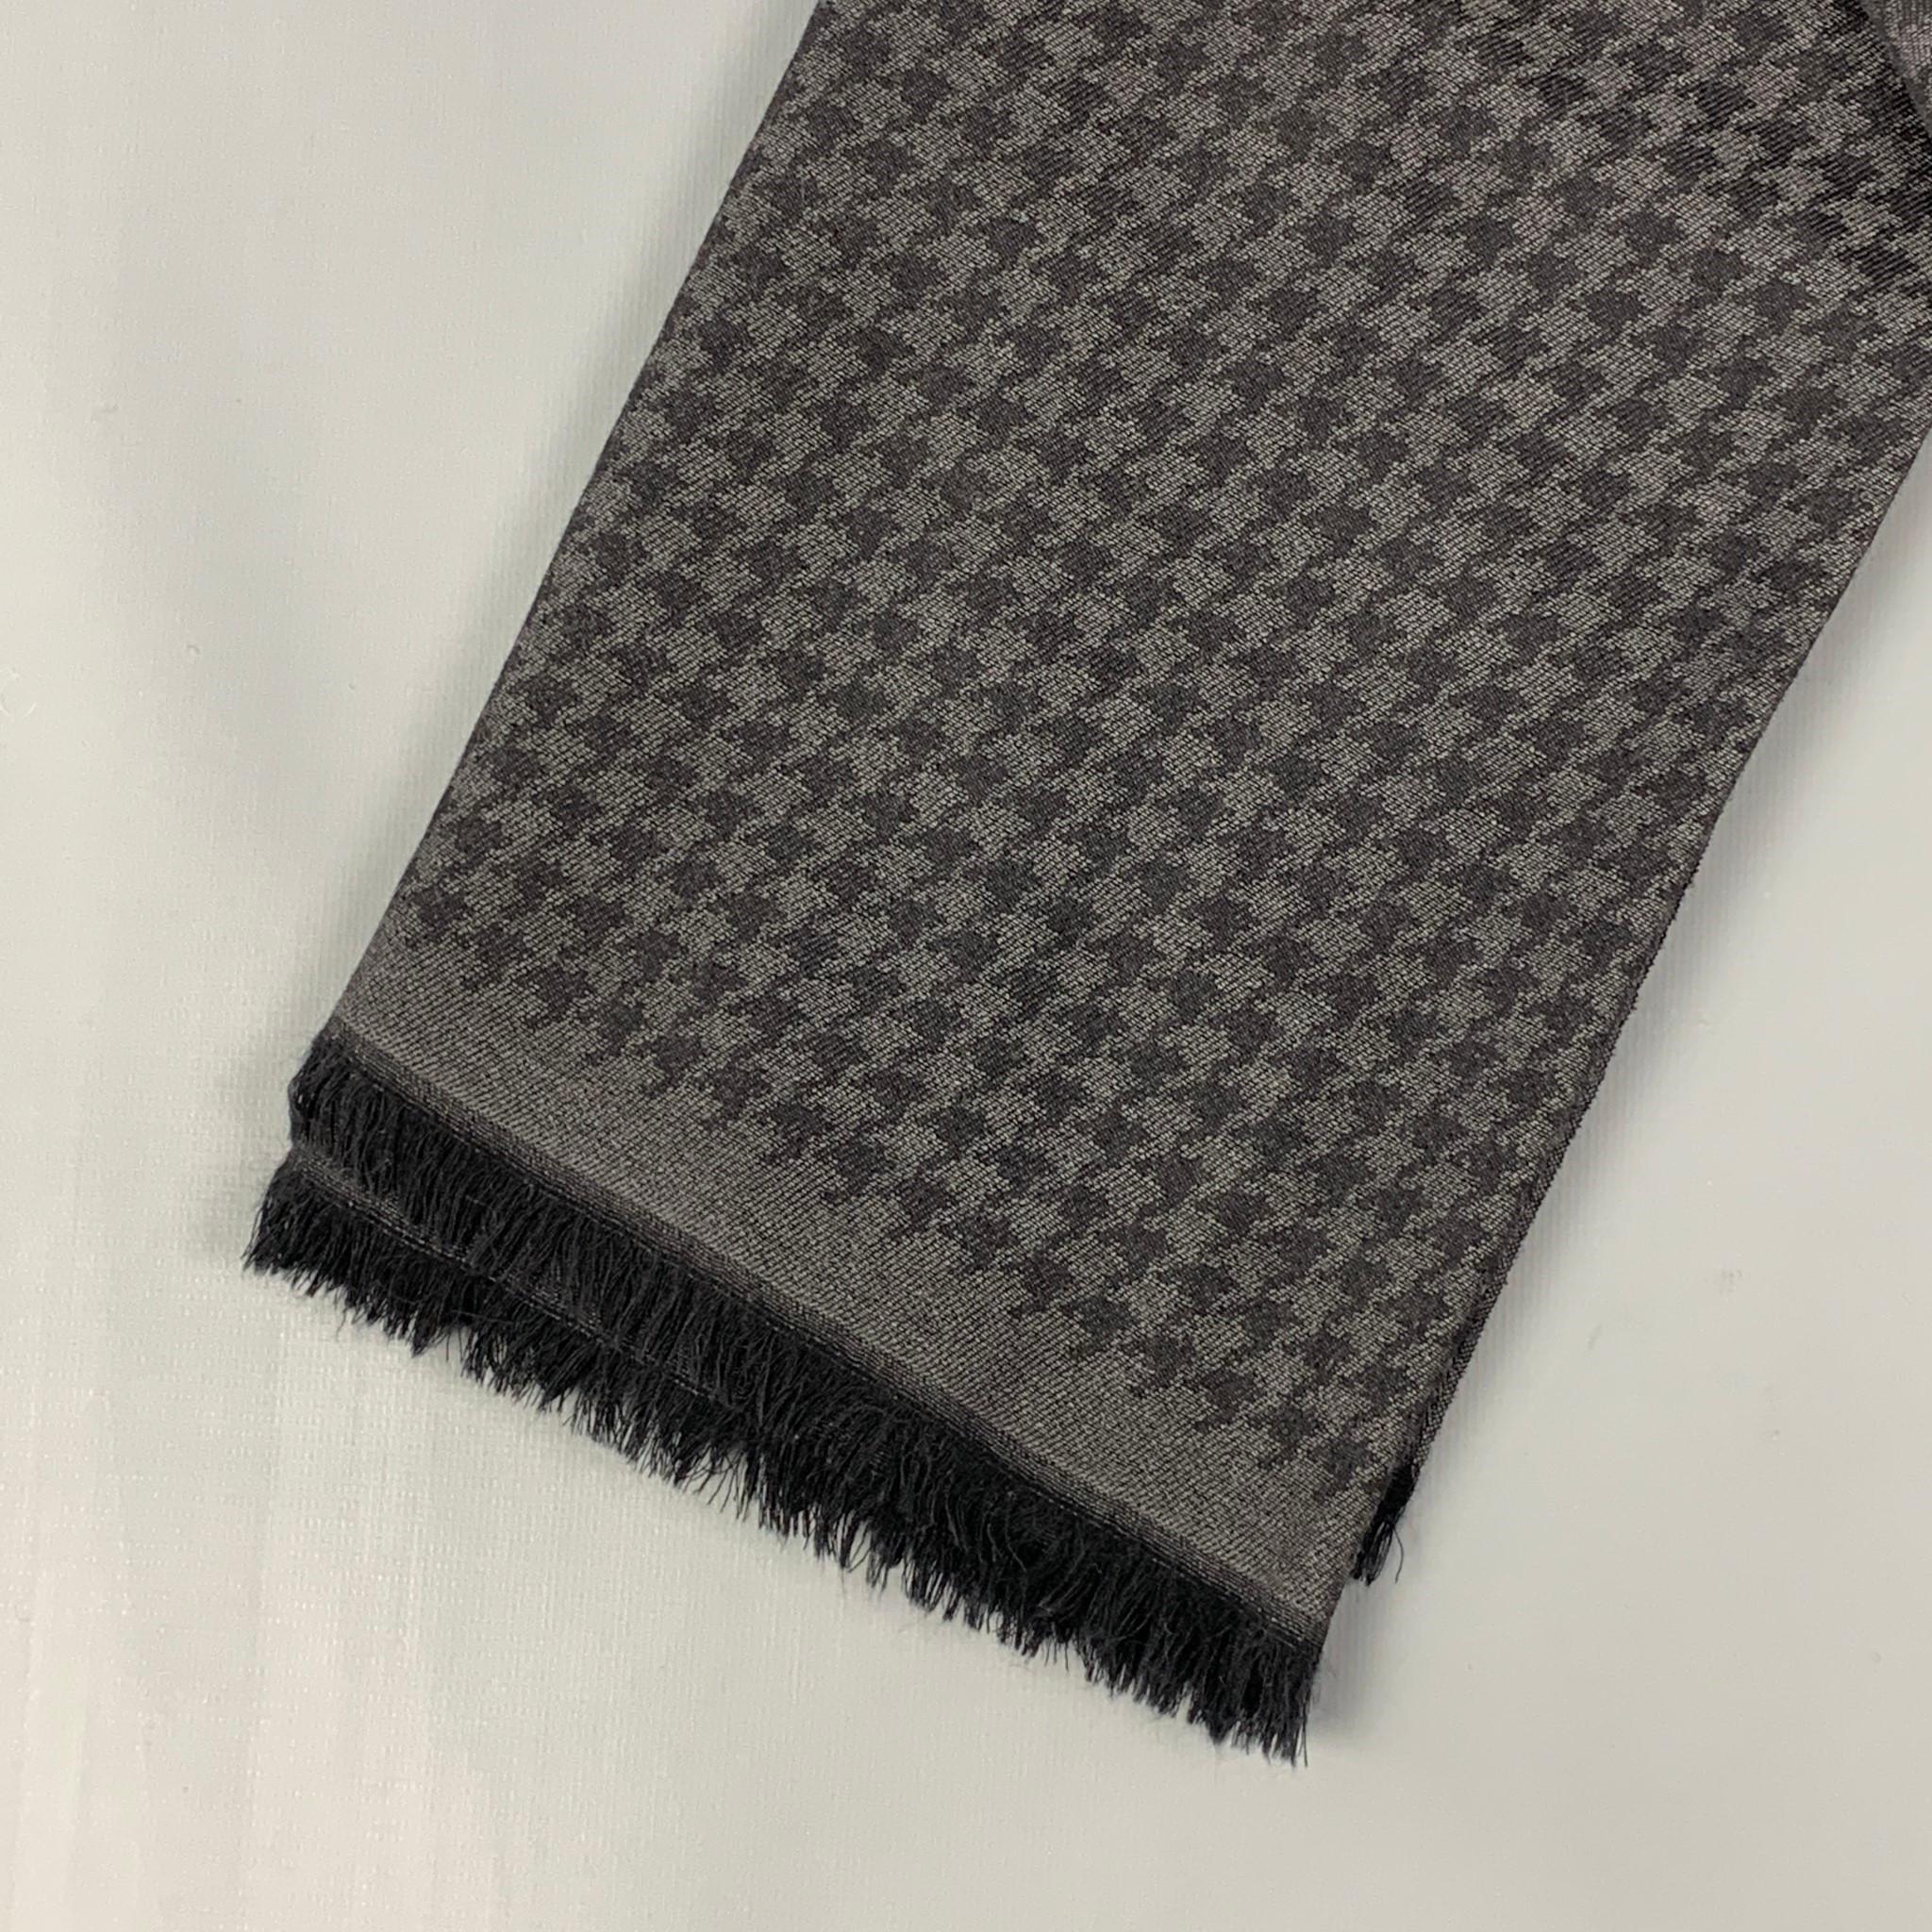 TOM FORD scarf comes in a grey & black houndstooth material with a fringe trim. 

Very Good Pre-Owned Condition. Fabric tag removed
Original Retail Price: $300.00

Measurements:

74 in. x 30 in. 